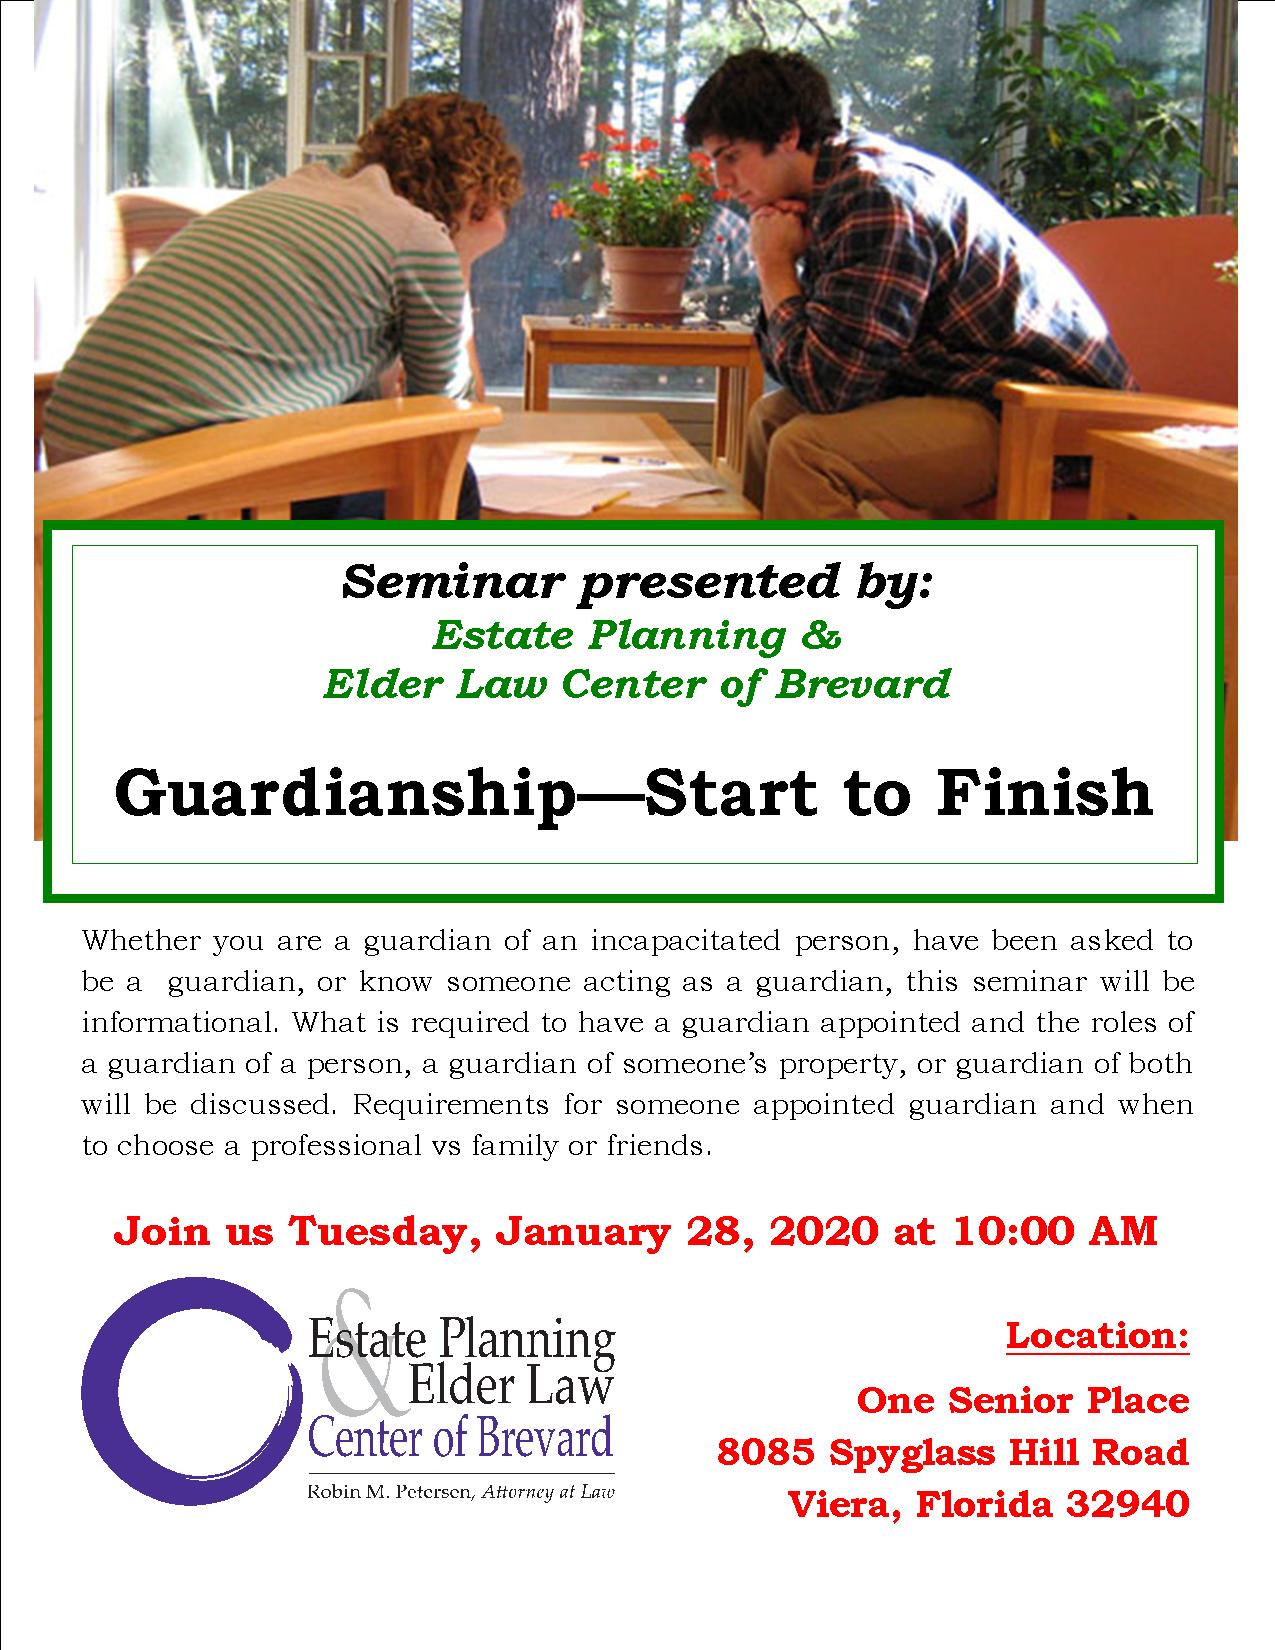 Guardianship - Start to Finish, presented by Estate Planning and Elder Law Center of Brevard